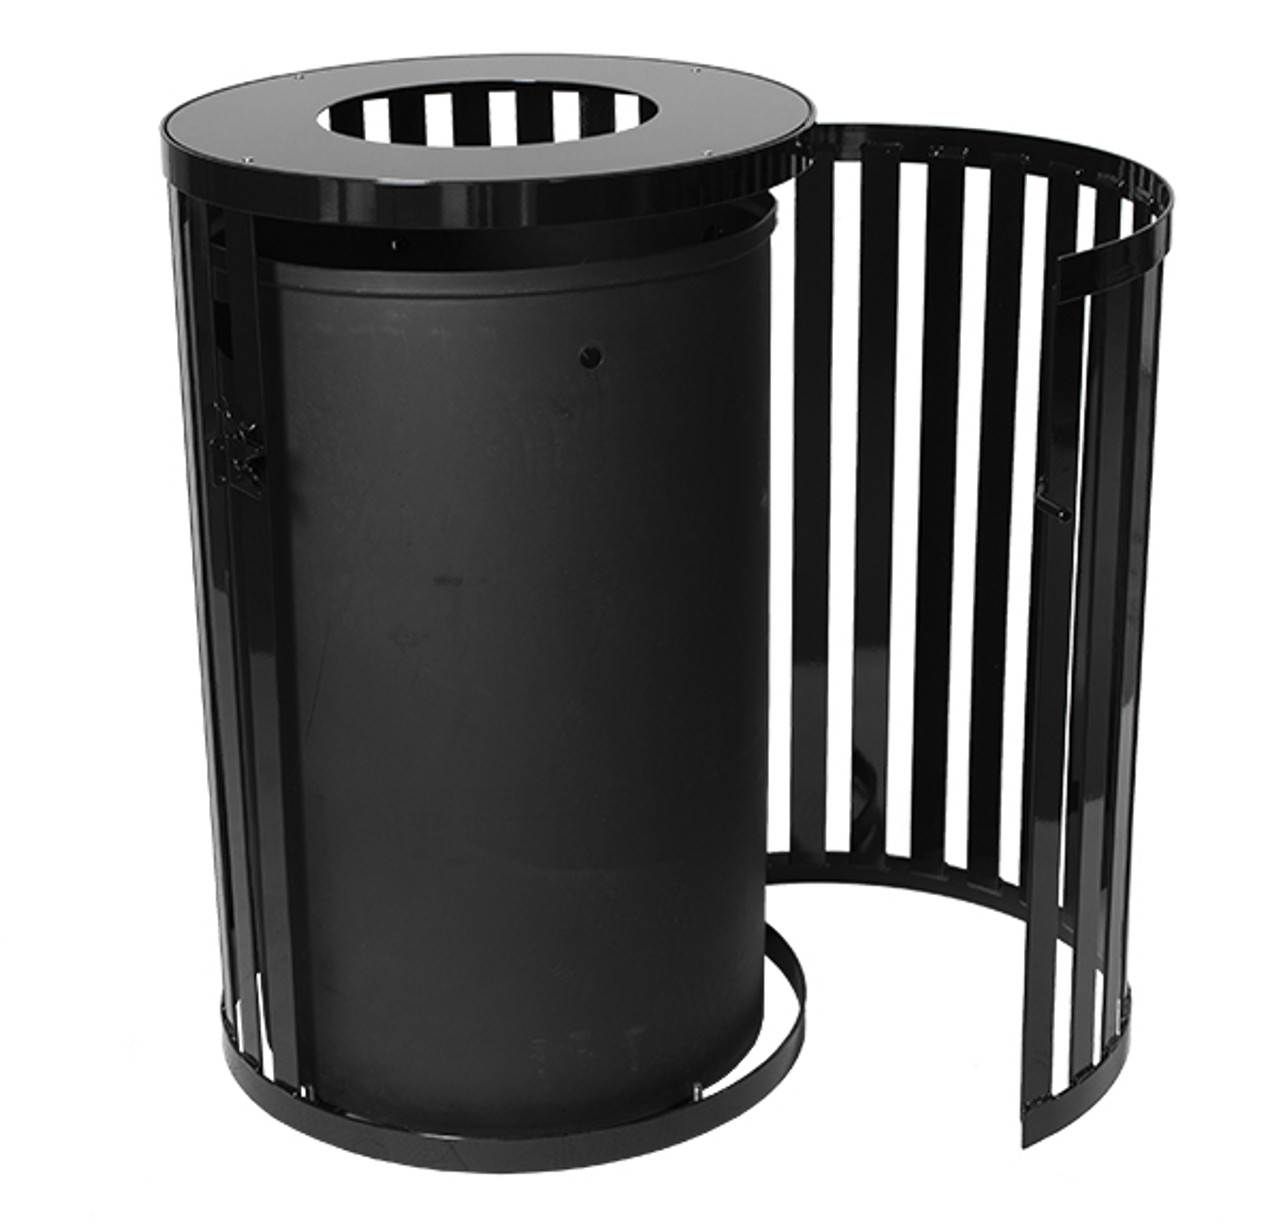 South Hampton 45 Gallon SCTP-40 Flat Top Trash Can with Lockable Side Gate Black